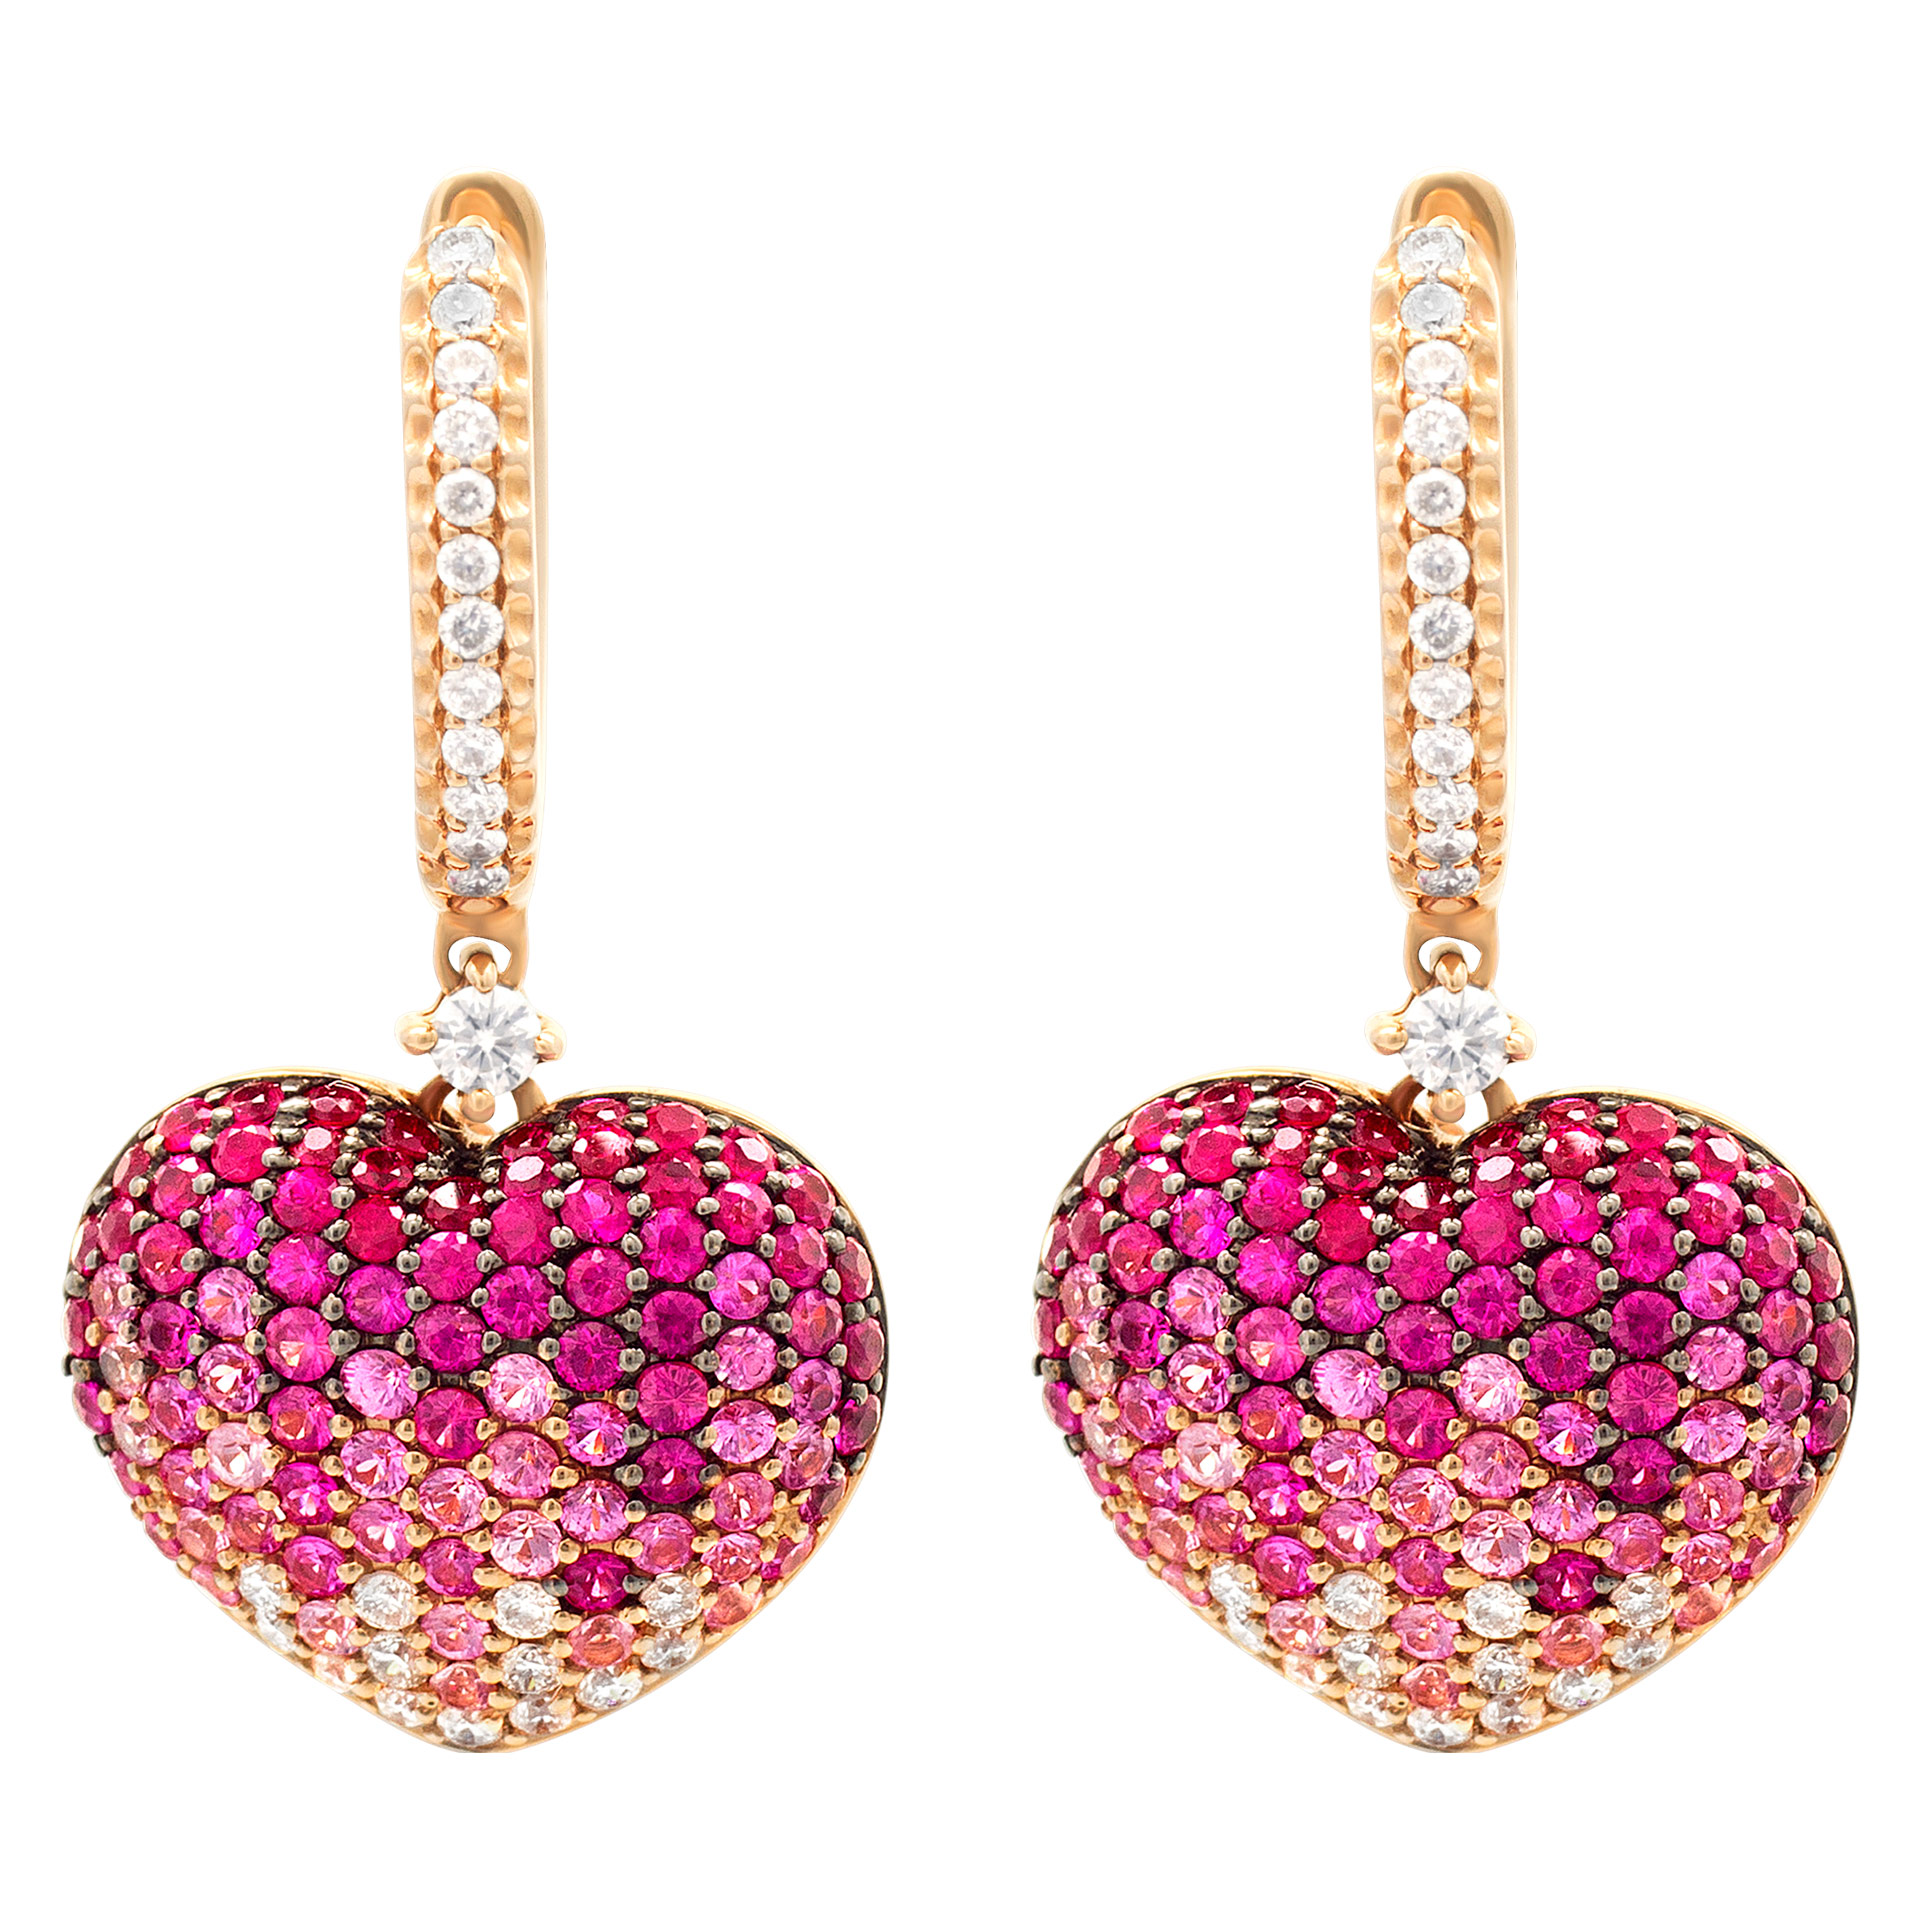 Heart shaped ruby, sapphire and diamond earrings in 18k pink gold